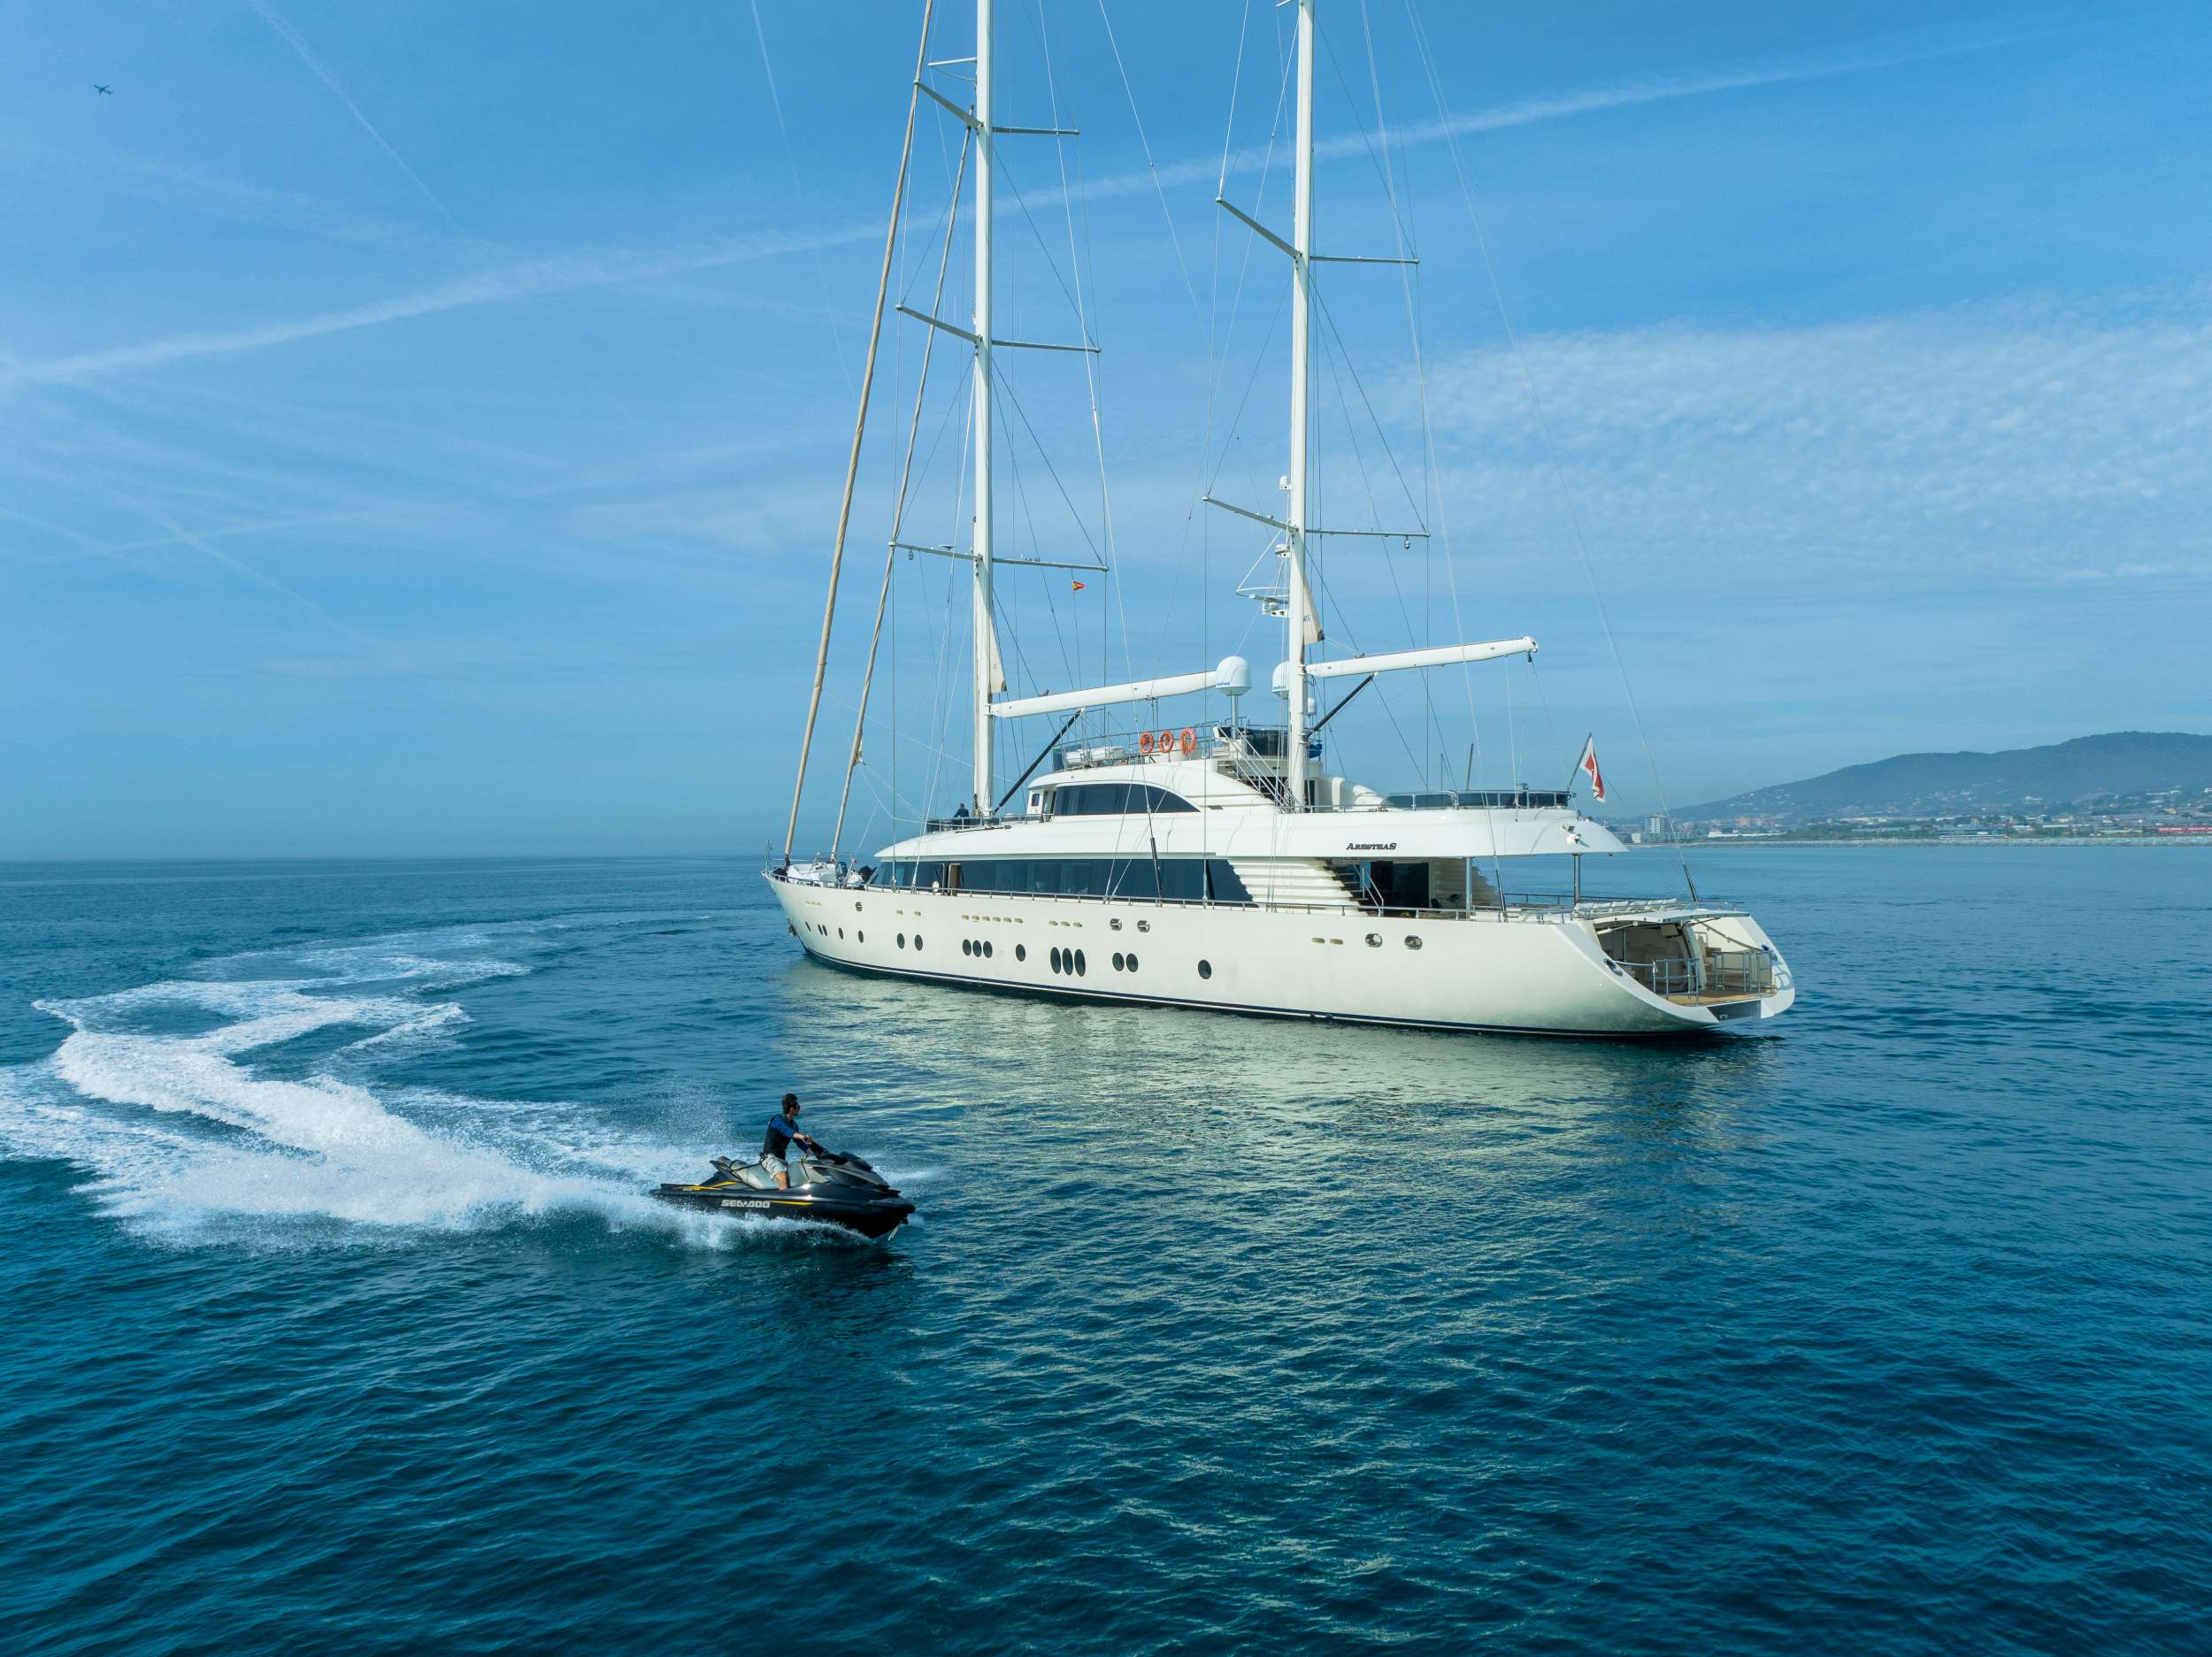 ARESTEAS - Yacht Charter Can Pastilla & Boat hire in W. Med -Naples/Sicily, W. Med -Riviera/Cors/Sard., W. Med - Spain/Balearics 1